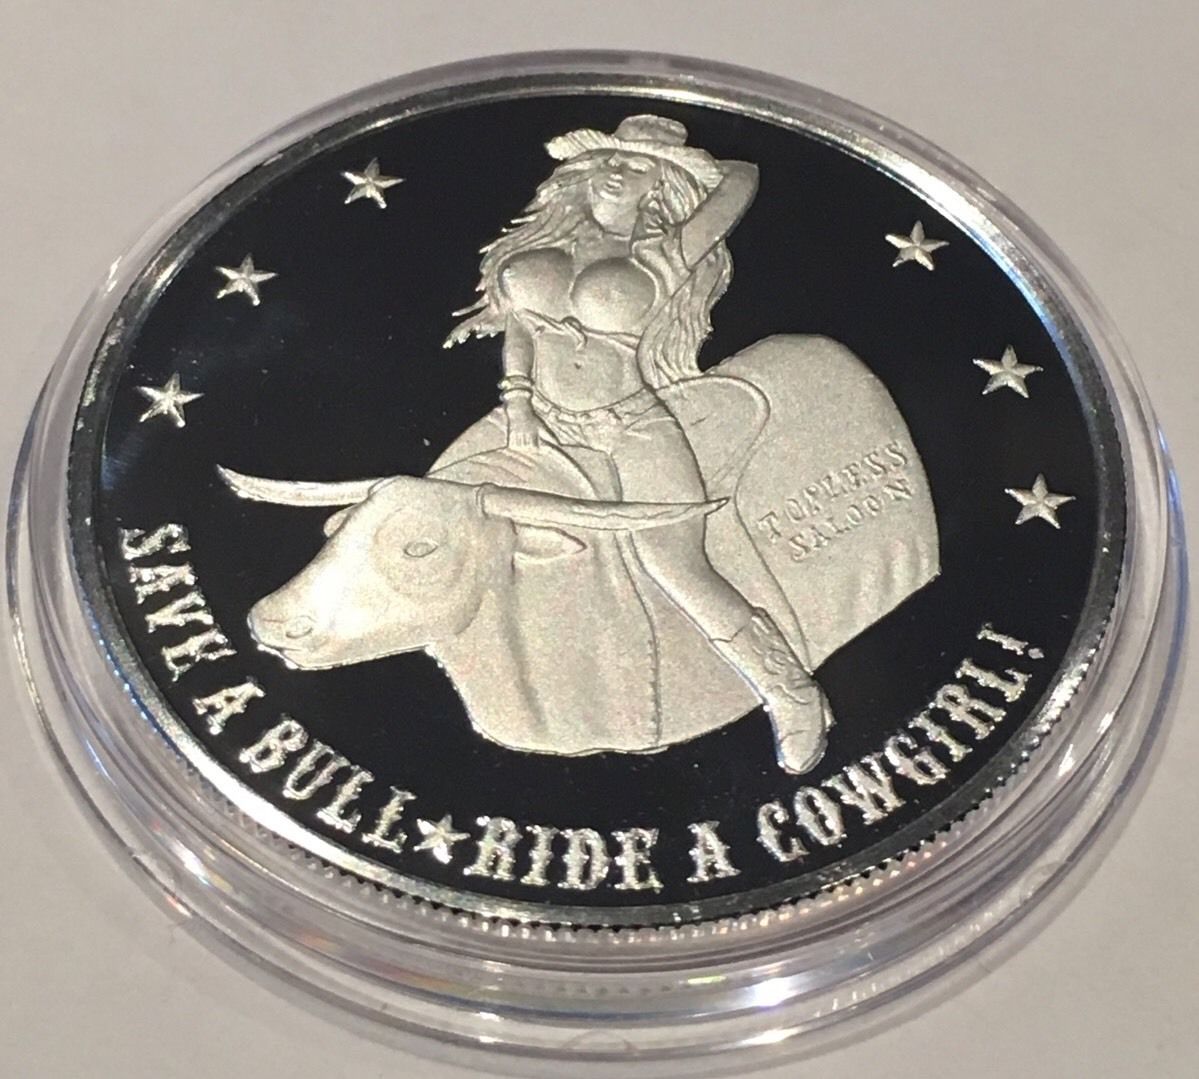 Save A Bull Ride A Cowgirl Proof Nude Girl 1 Troy Oz .999 Fine Silver Coin Round